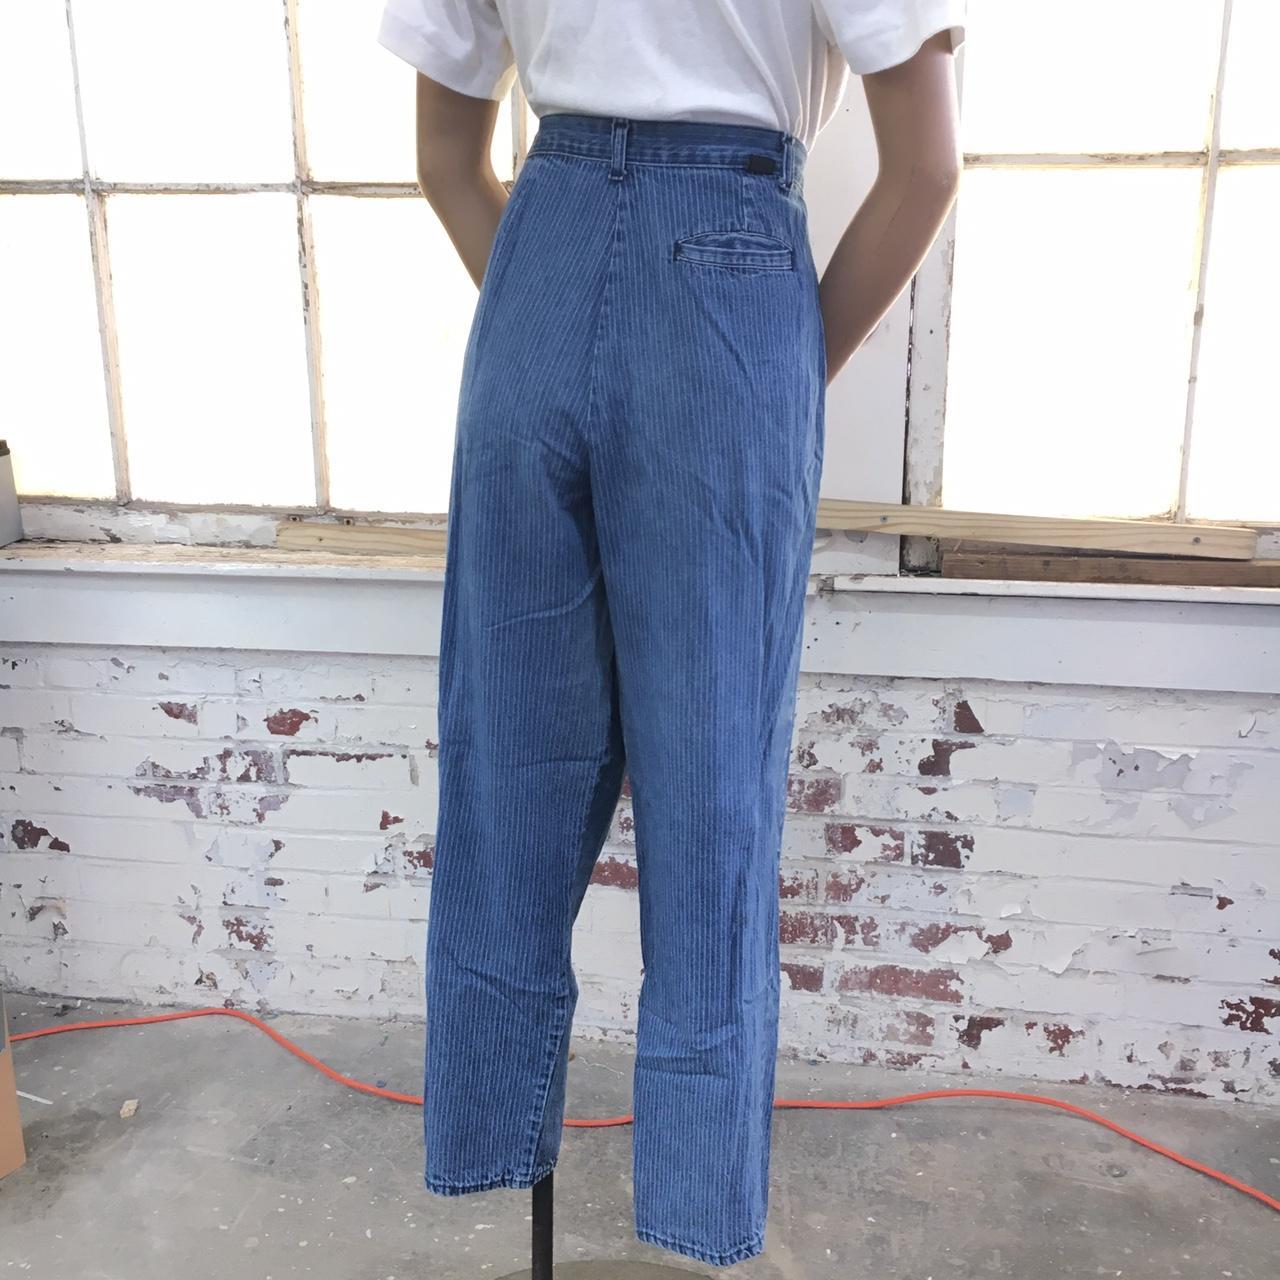 Women's Blue and White Jeans (2)